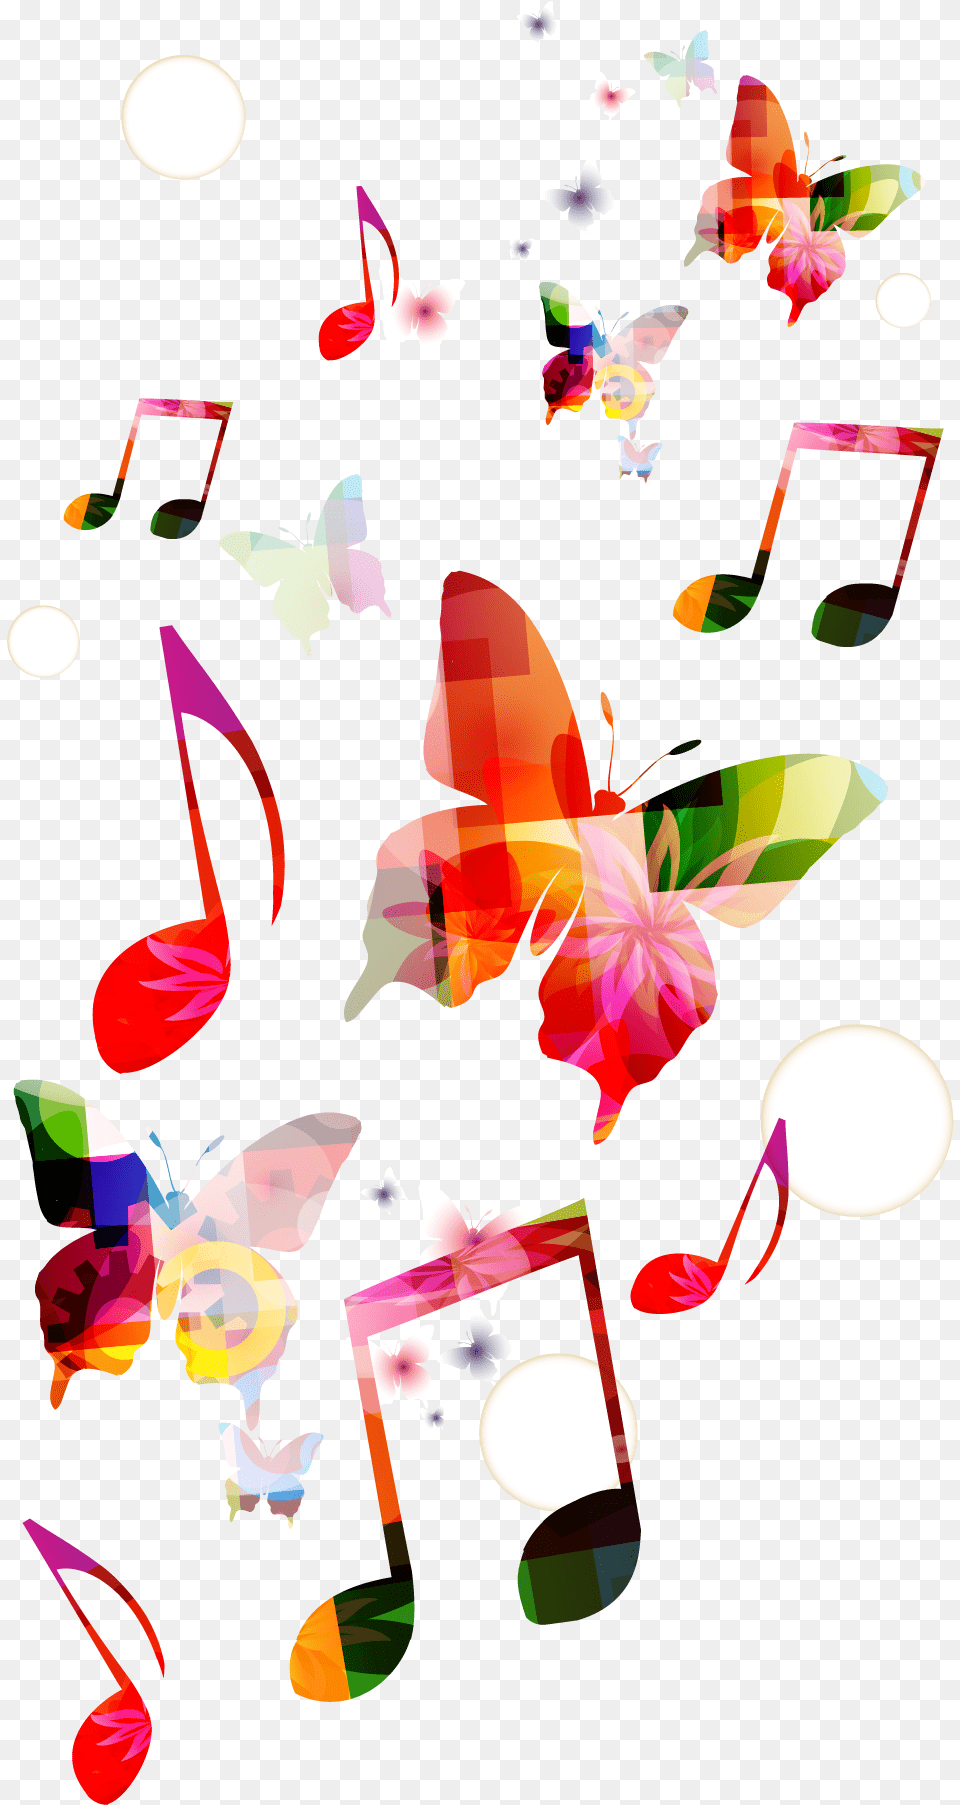 Musical Background Clef Butterfly Music Background Hd, Art, Graphics, Paper, Floral Design Png